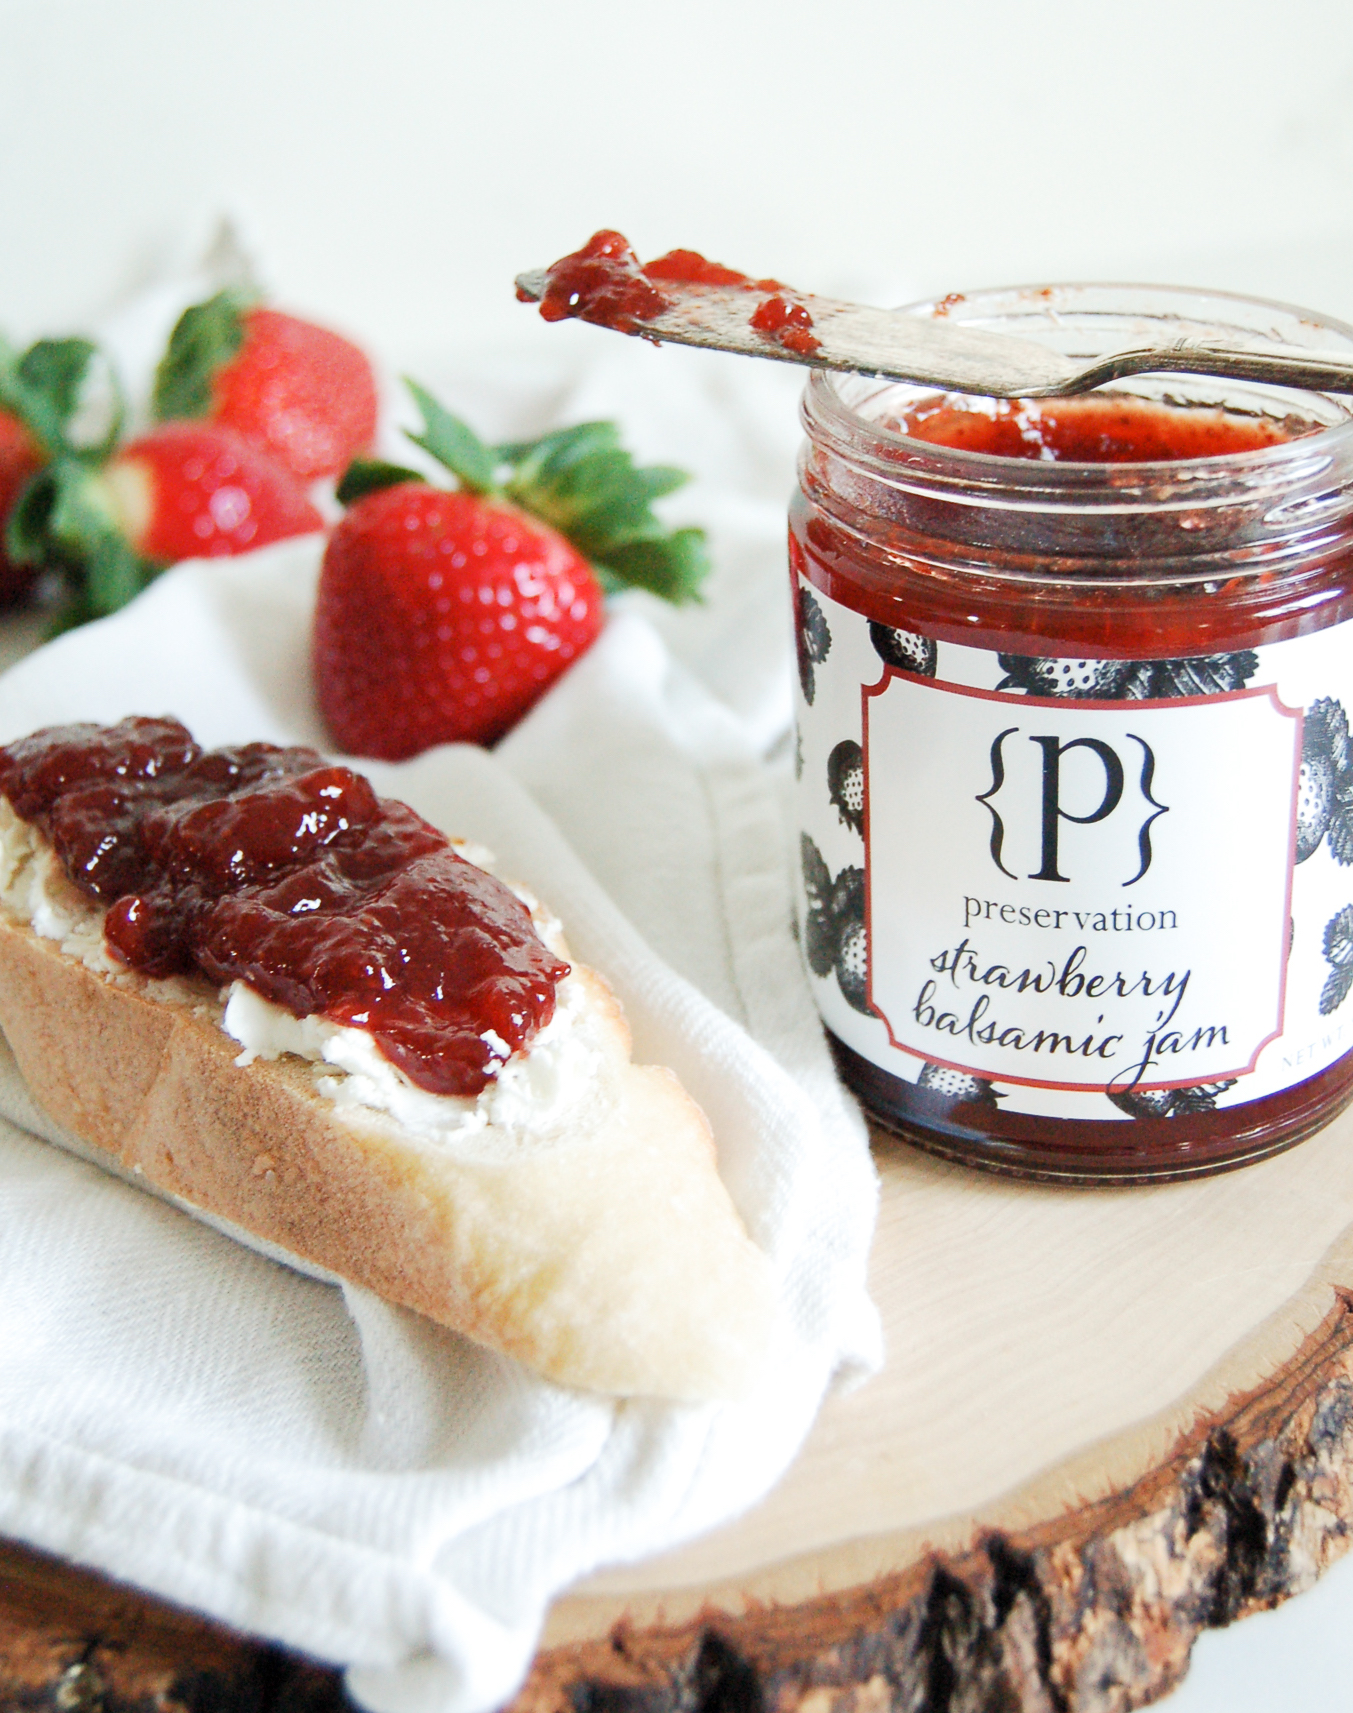 Strawberry balsamic jam from Preservation